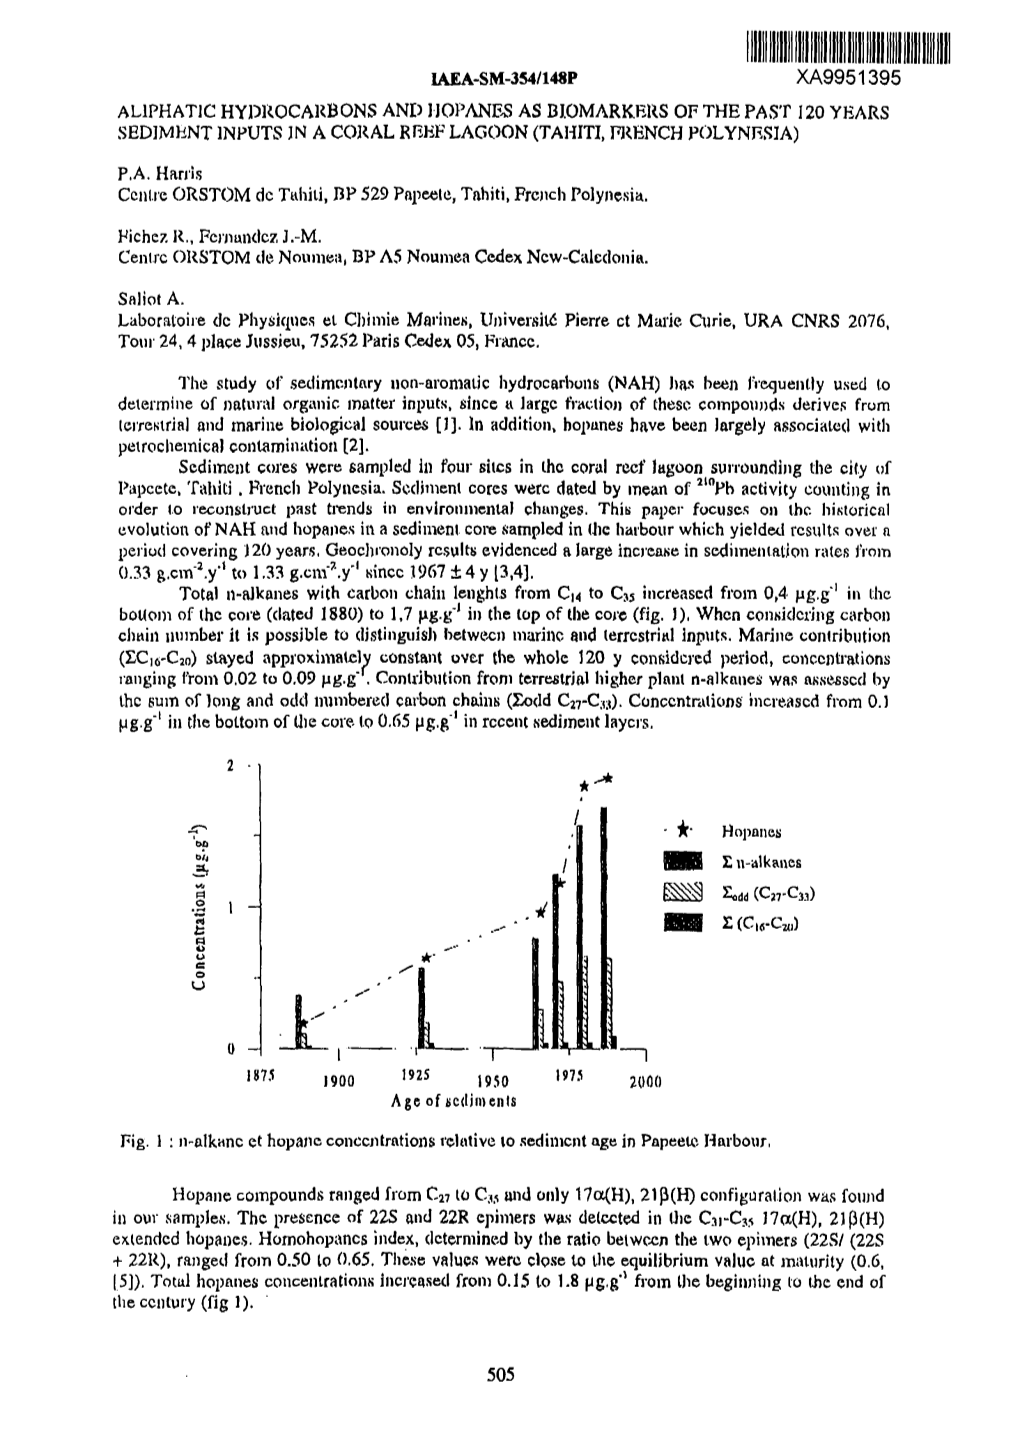 Aliphatic Hydrocarbons and Hopanes As Biomarkers of the Past 120 Years